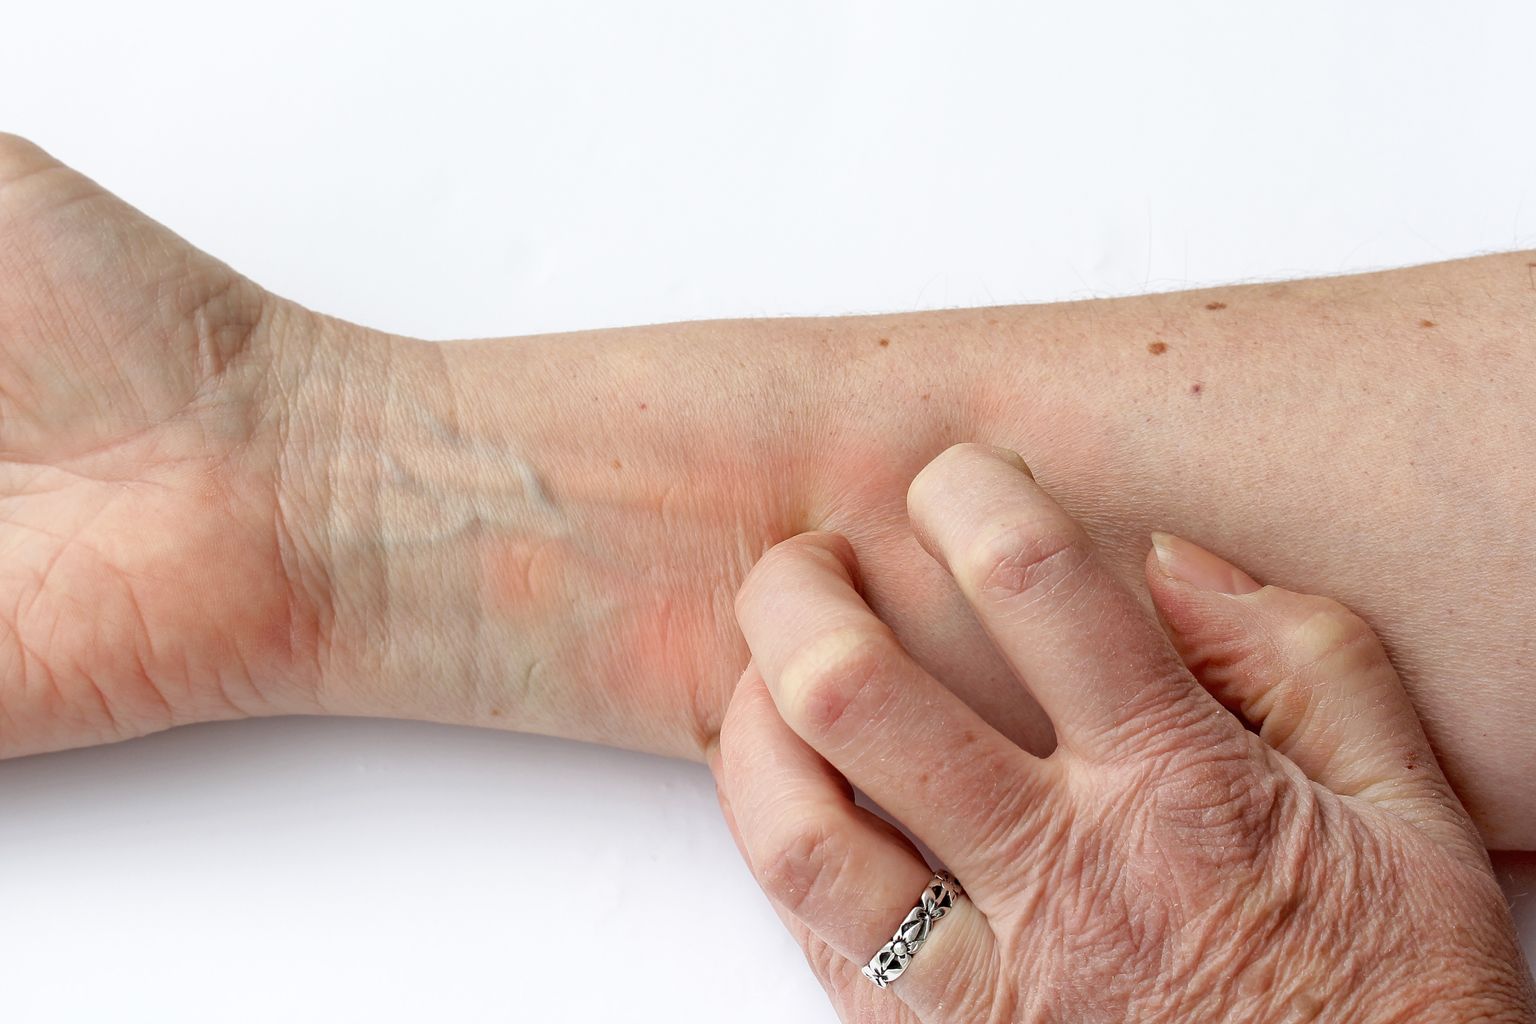 Itching reddened skin - A woman scratches her arm